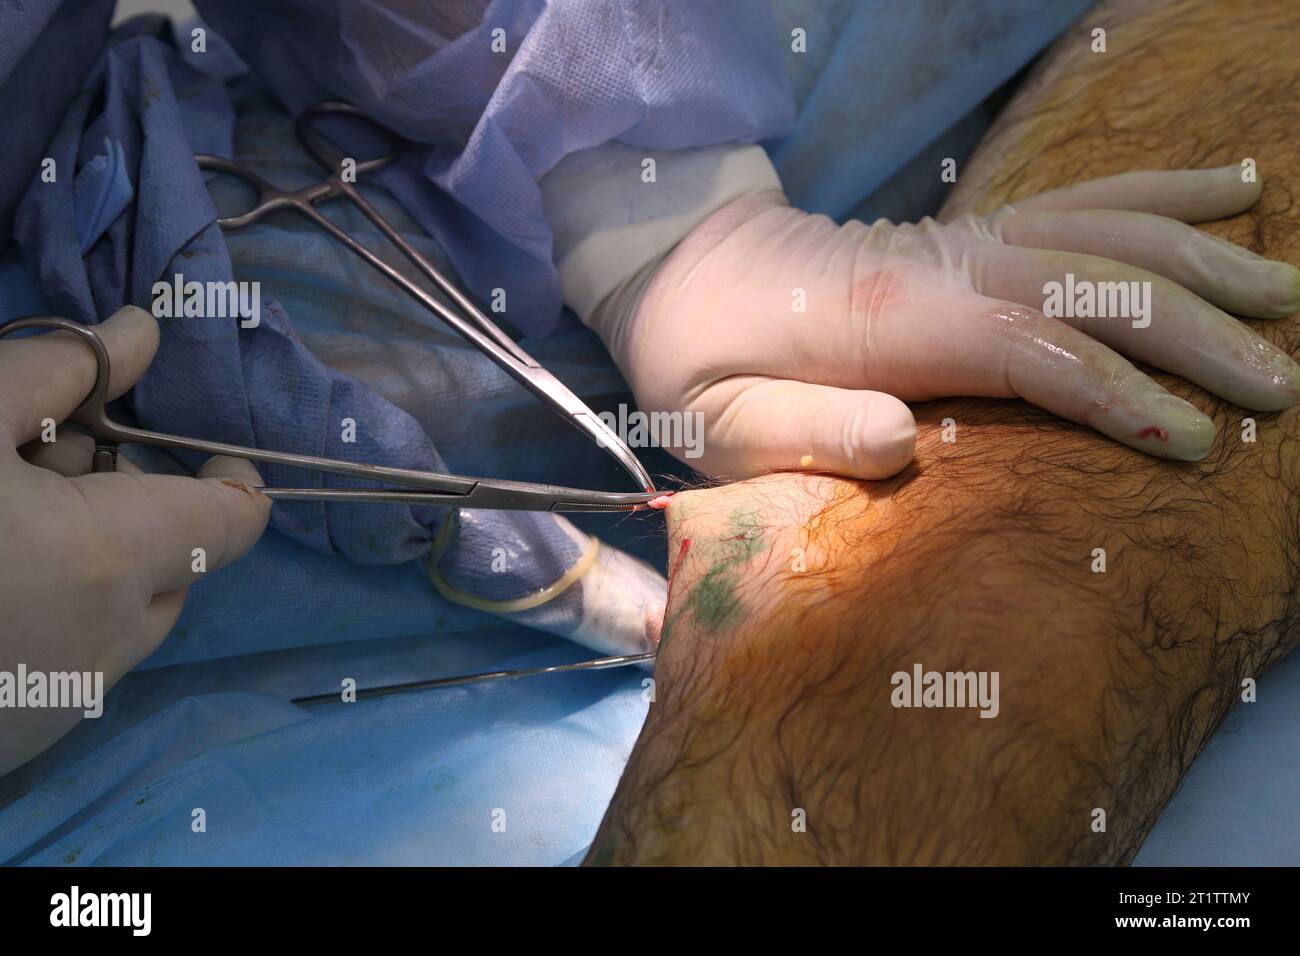 Medical surgery for endovenous laser photocoagulation of the great saphenous vein. Miniphlegectomy. Endovenous laser coagulation vein. Stock Photo